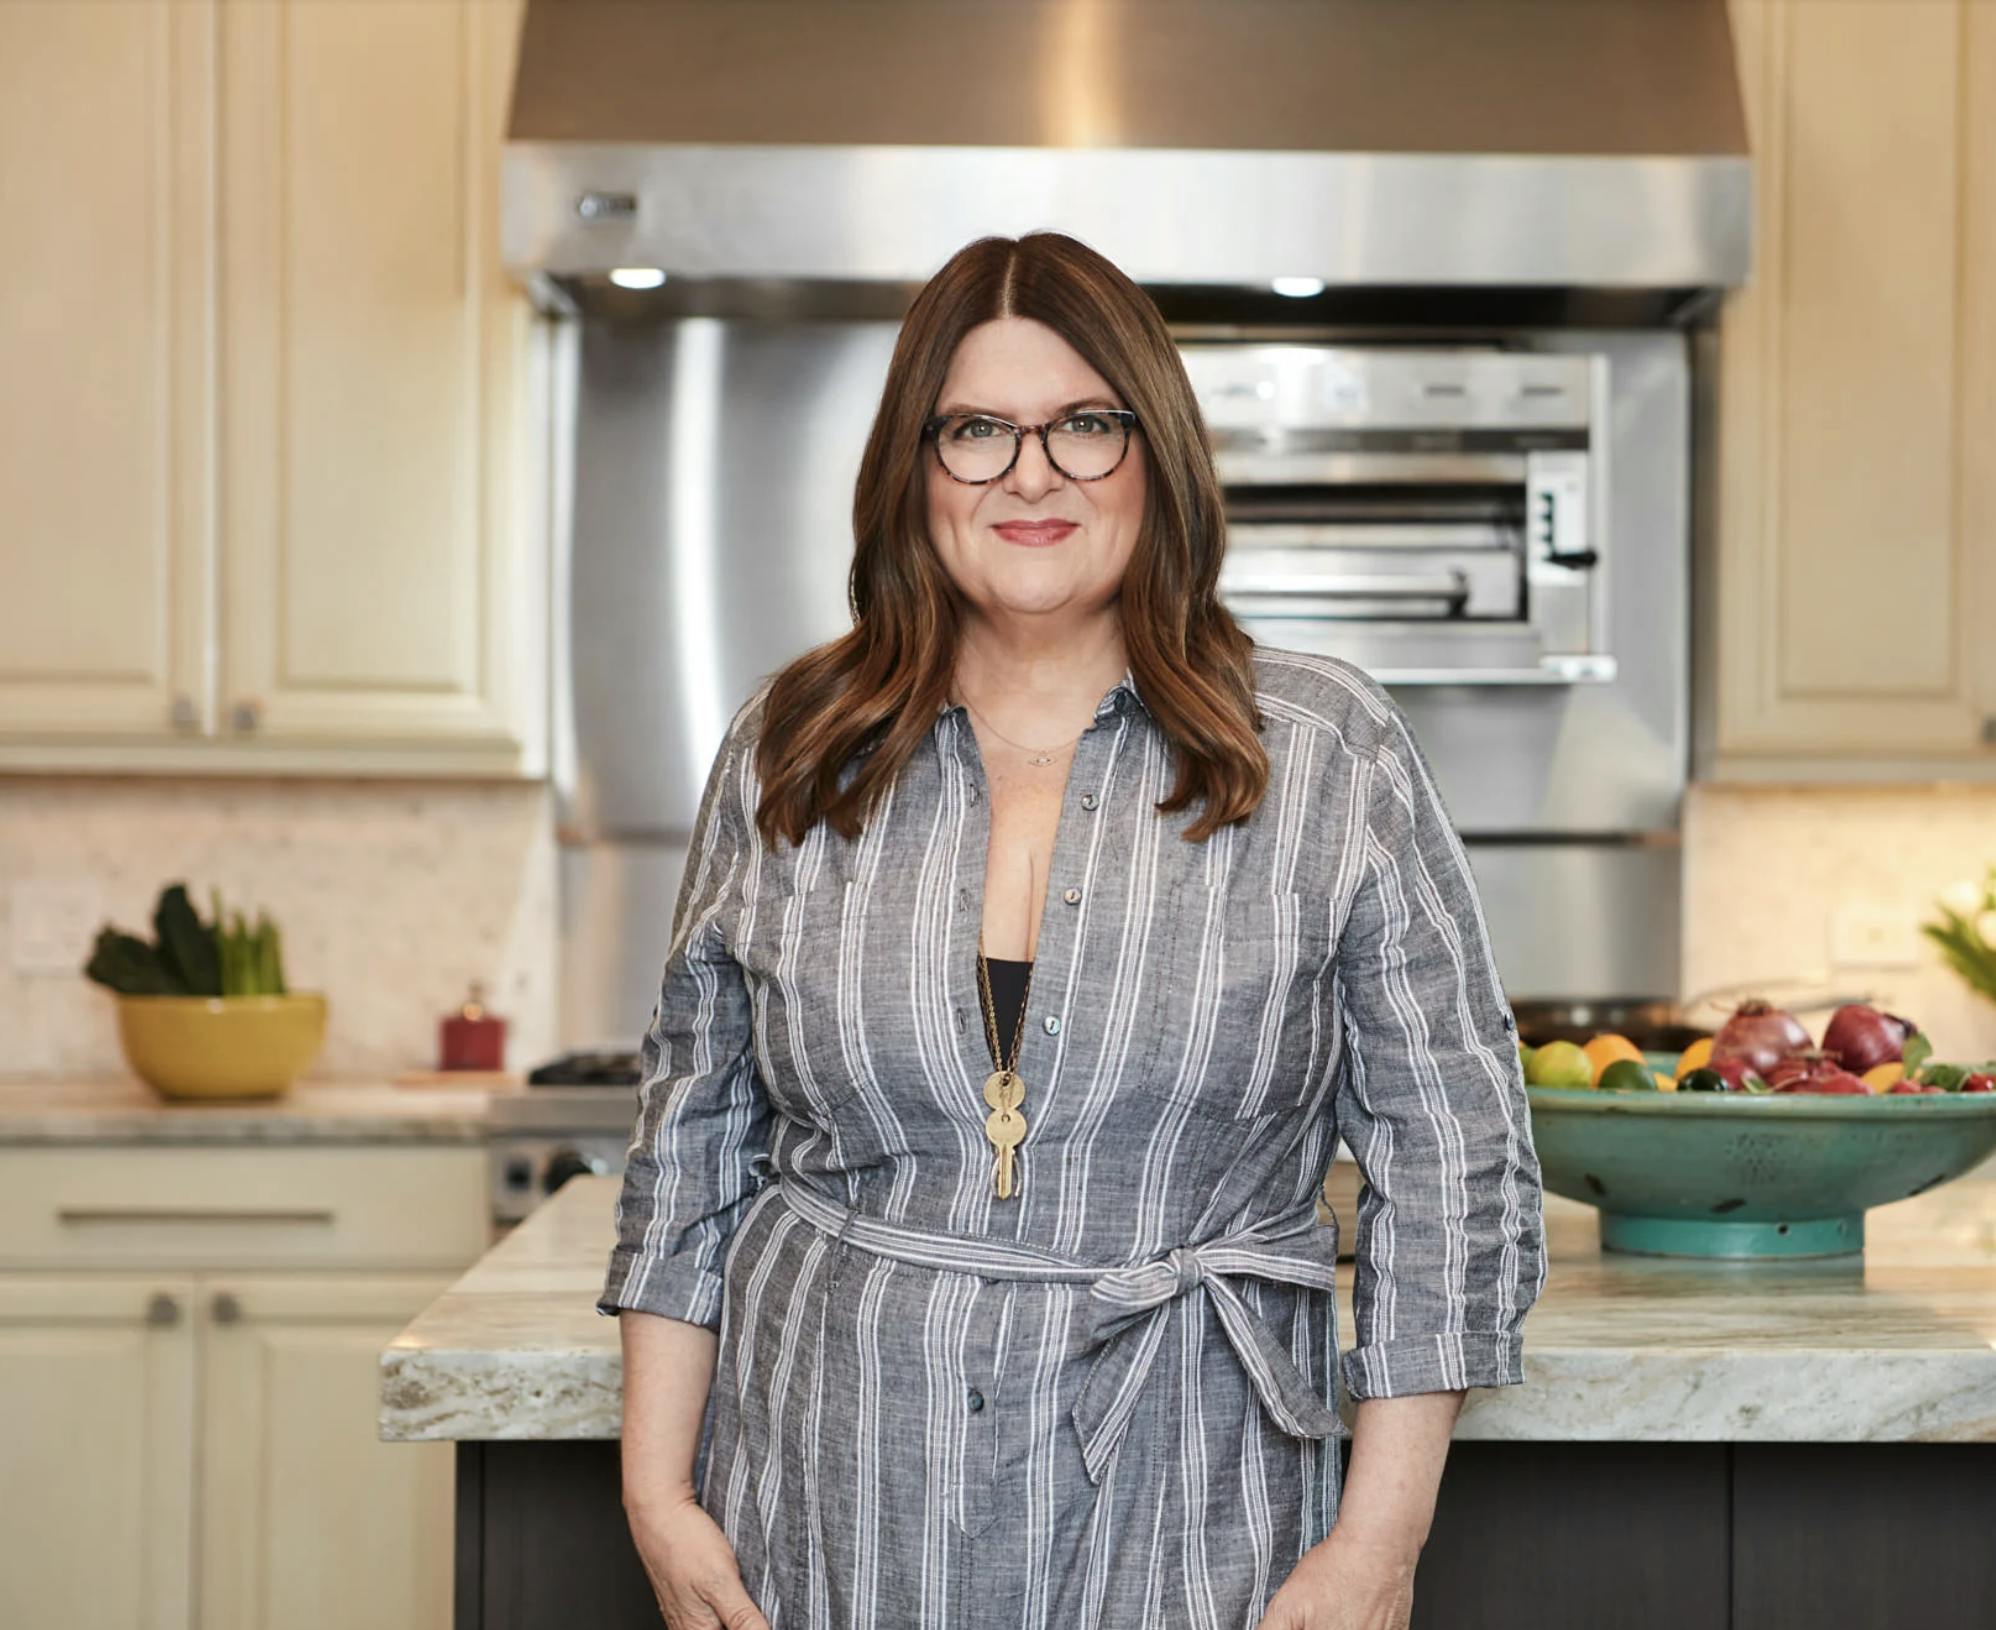 Relax–It’s Just Food! Finding the Fun in Cooking with Teri Turner